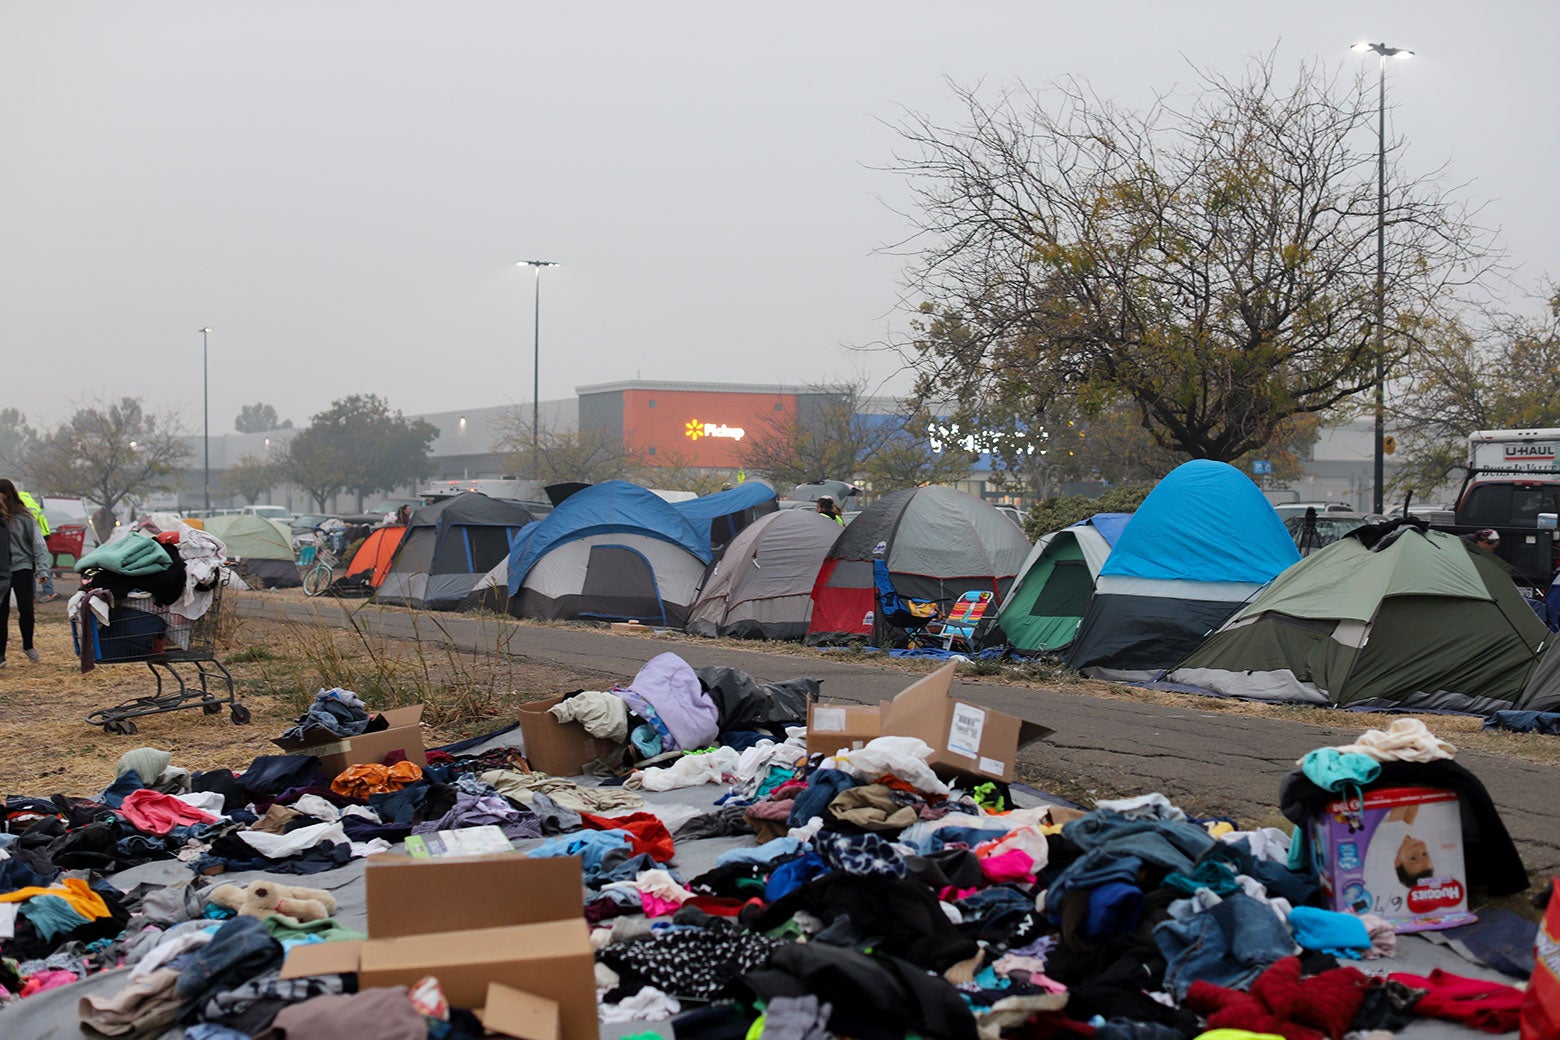 The tent encampment in the Walmart parking lot in Chico, California